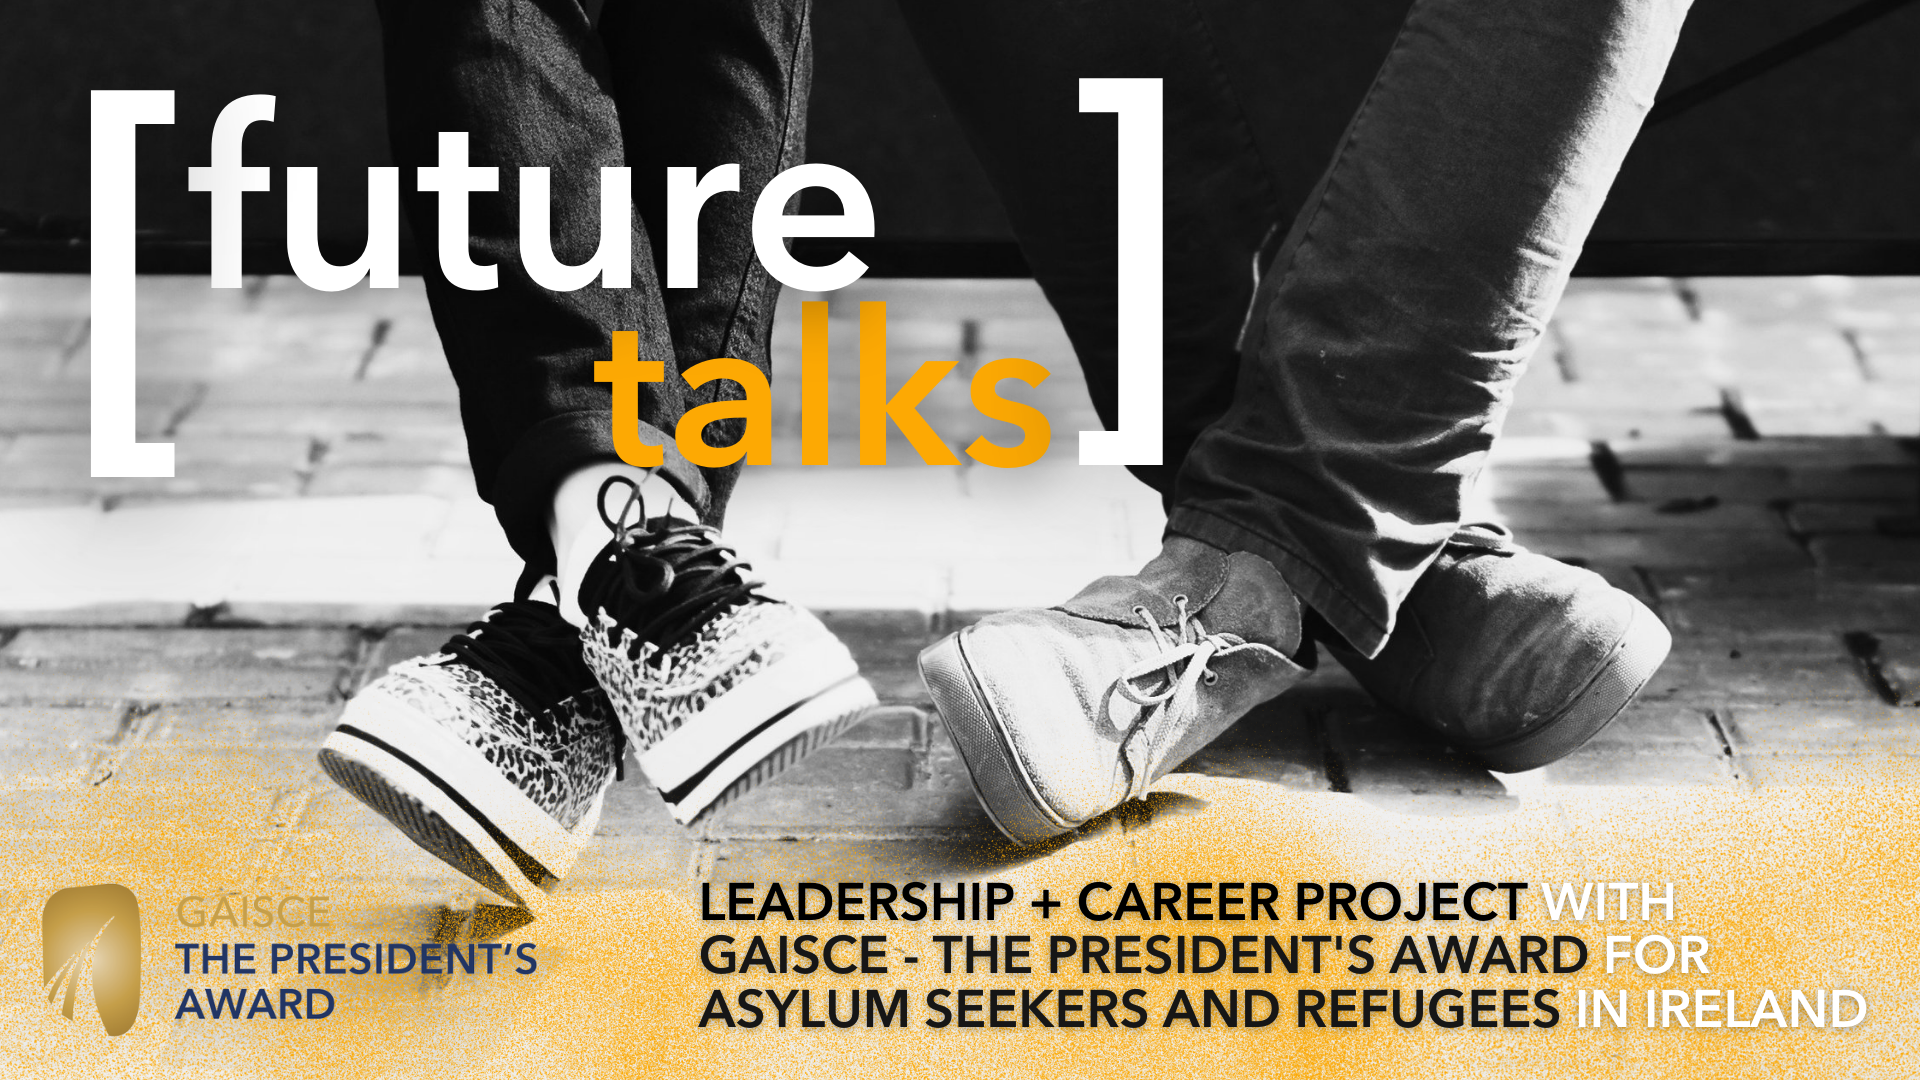 Future Talks - a leadership and career project with Gaisce for Asylum Seekers and Refugees in Ireland